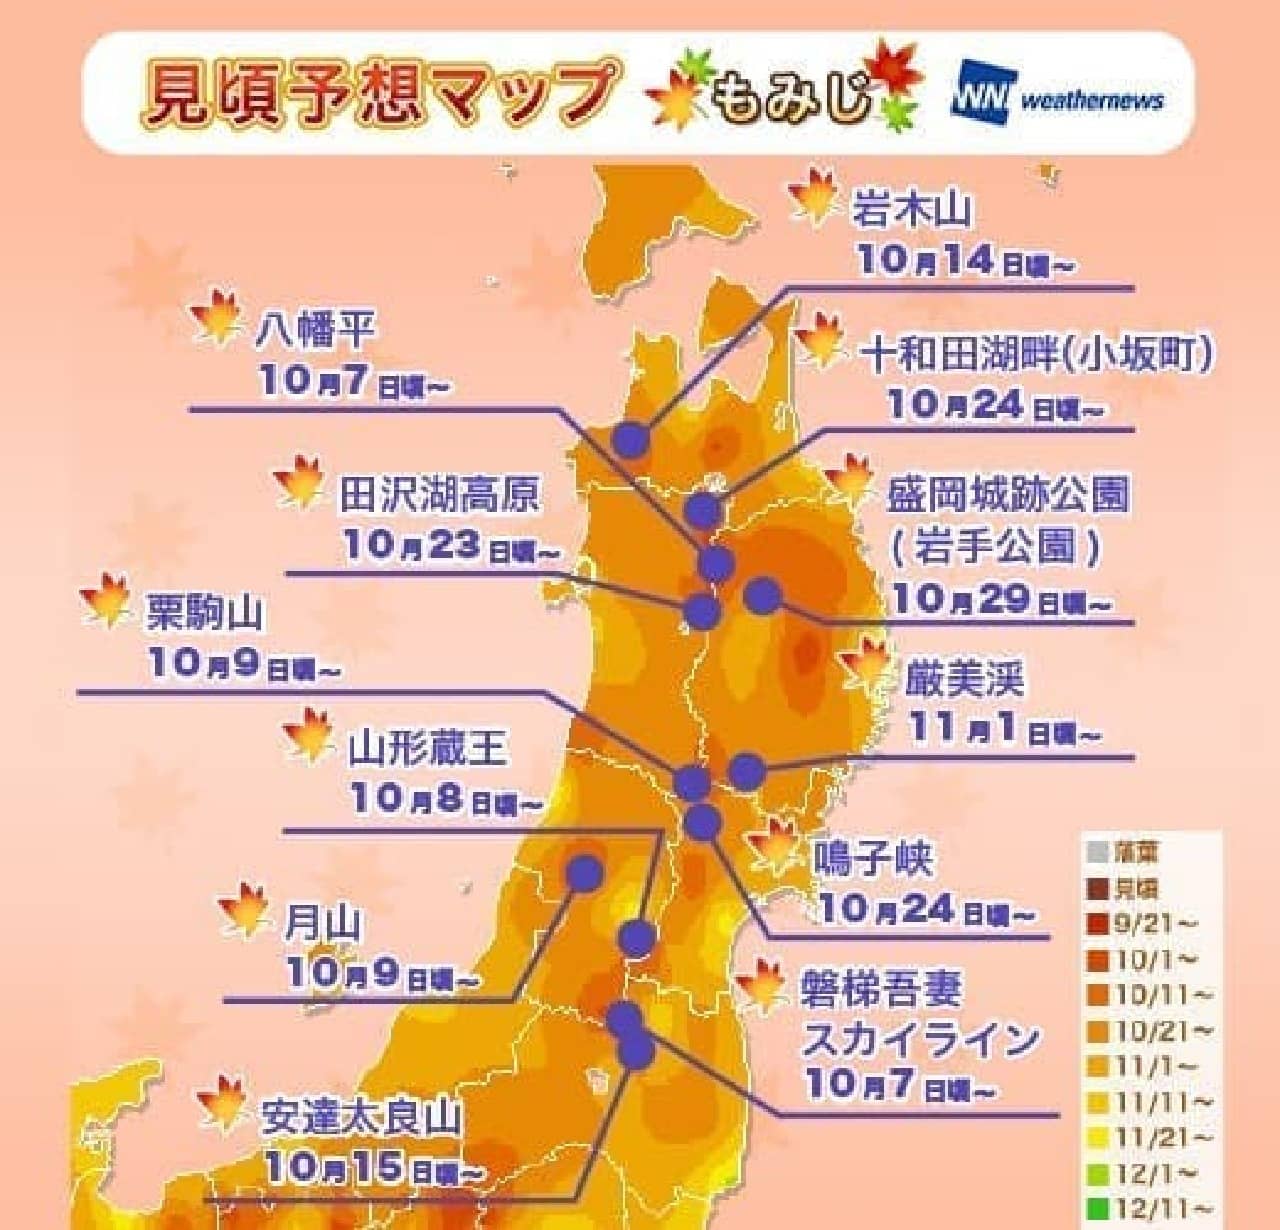 Weathernews releases a map of the best time to see the autumn leaves